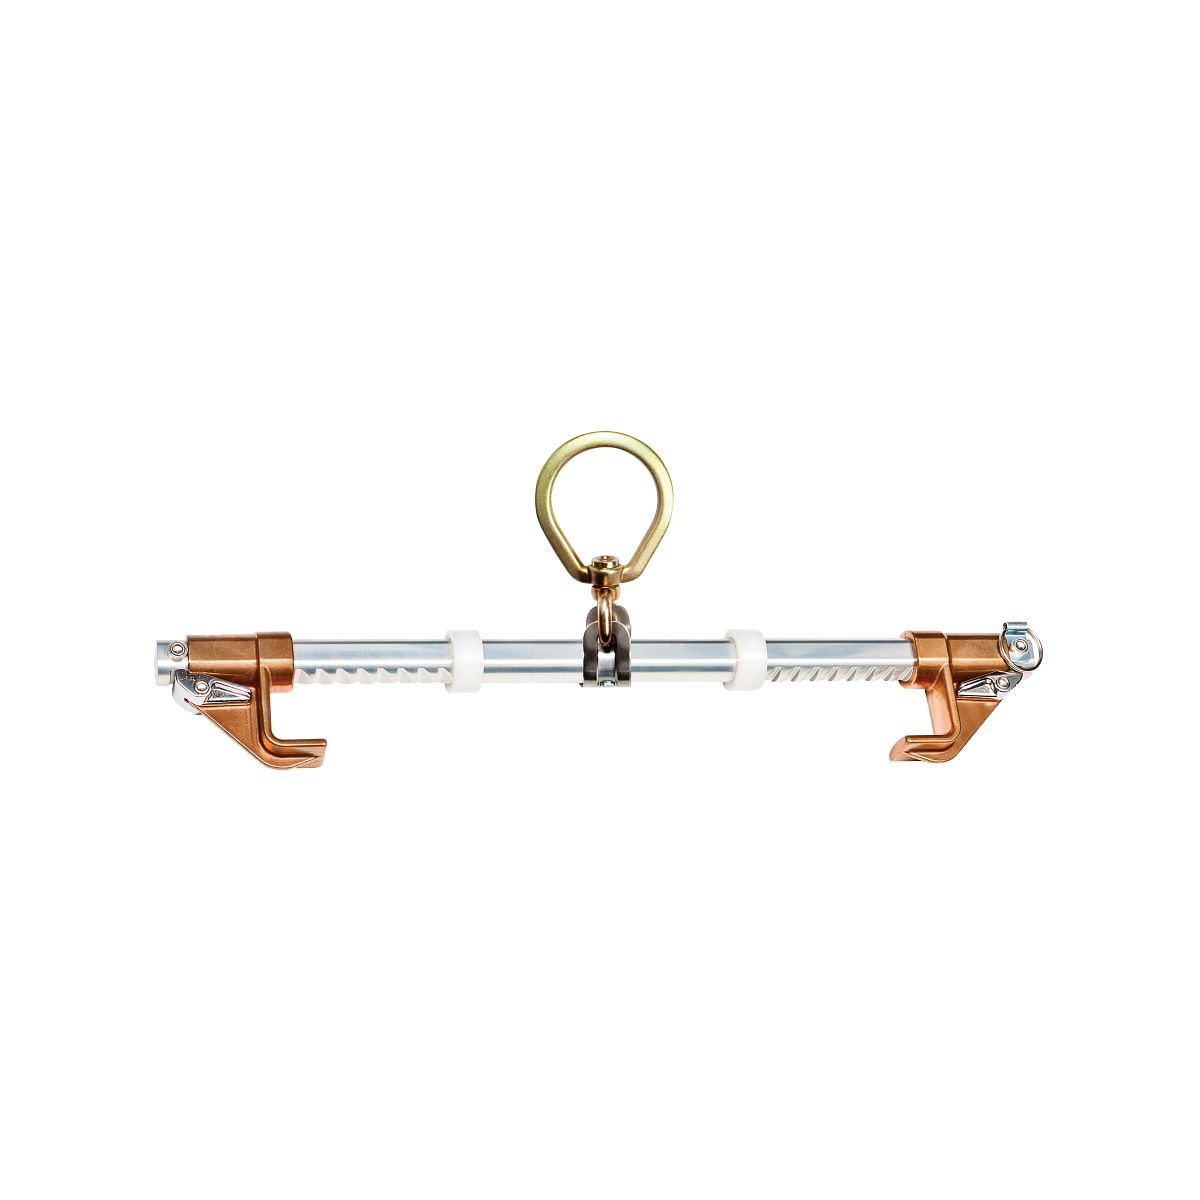 Werner I-Beam Sliding Anchor from Columbia Safety